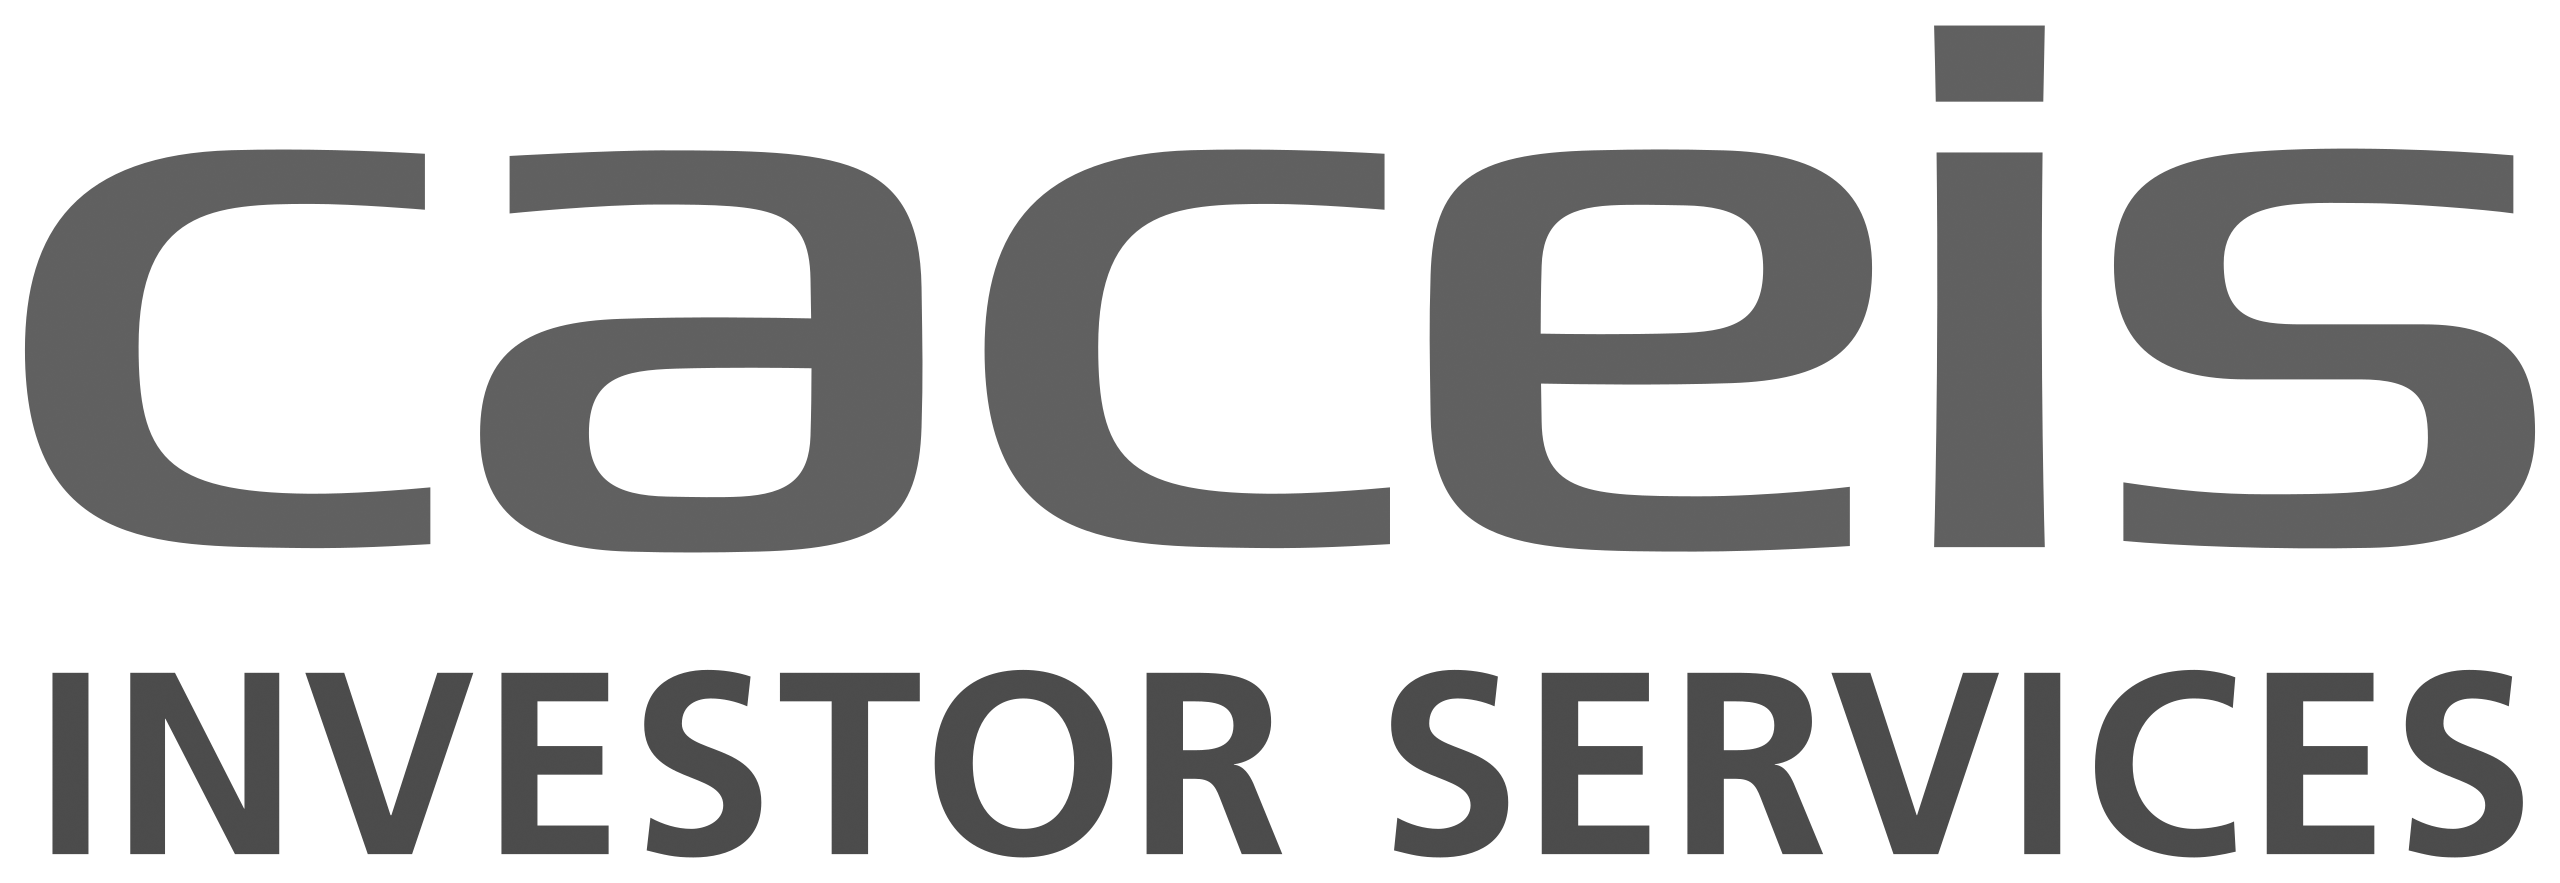 caceis_bank_logo.png